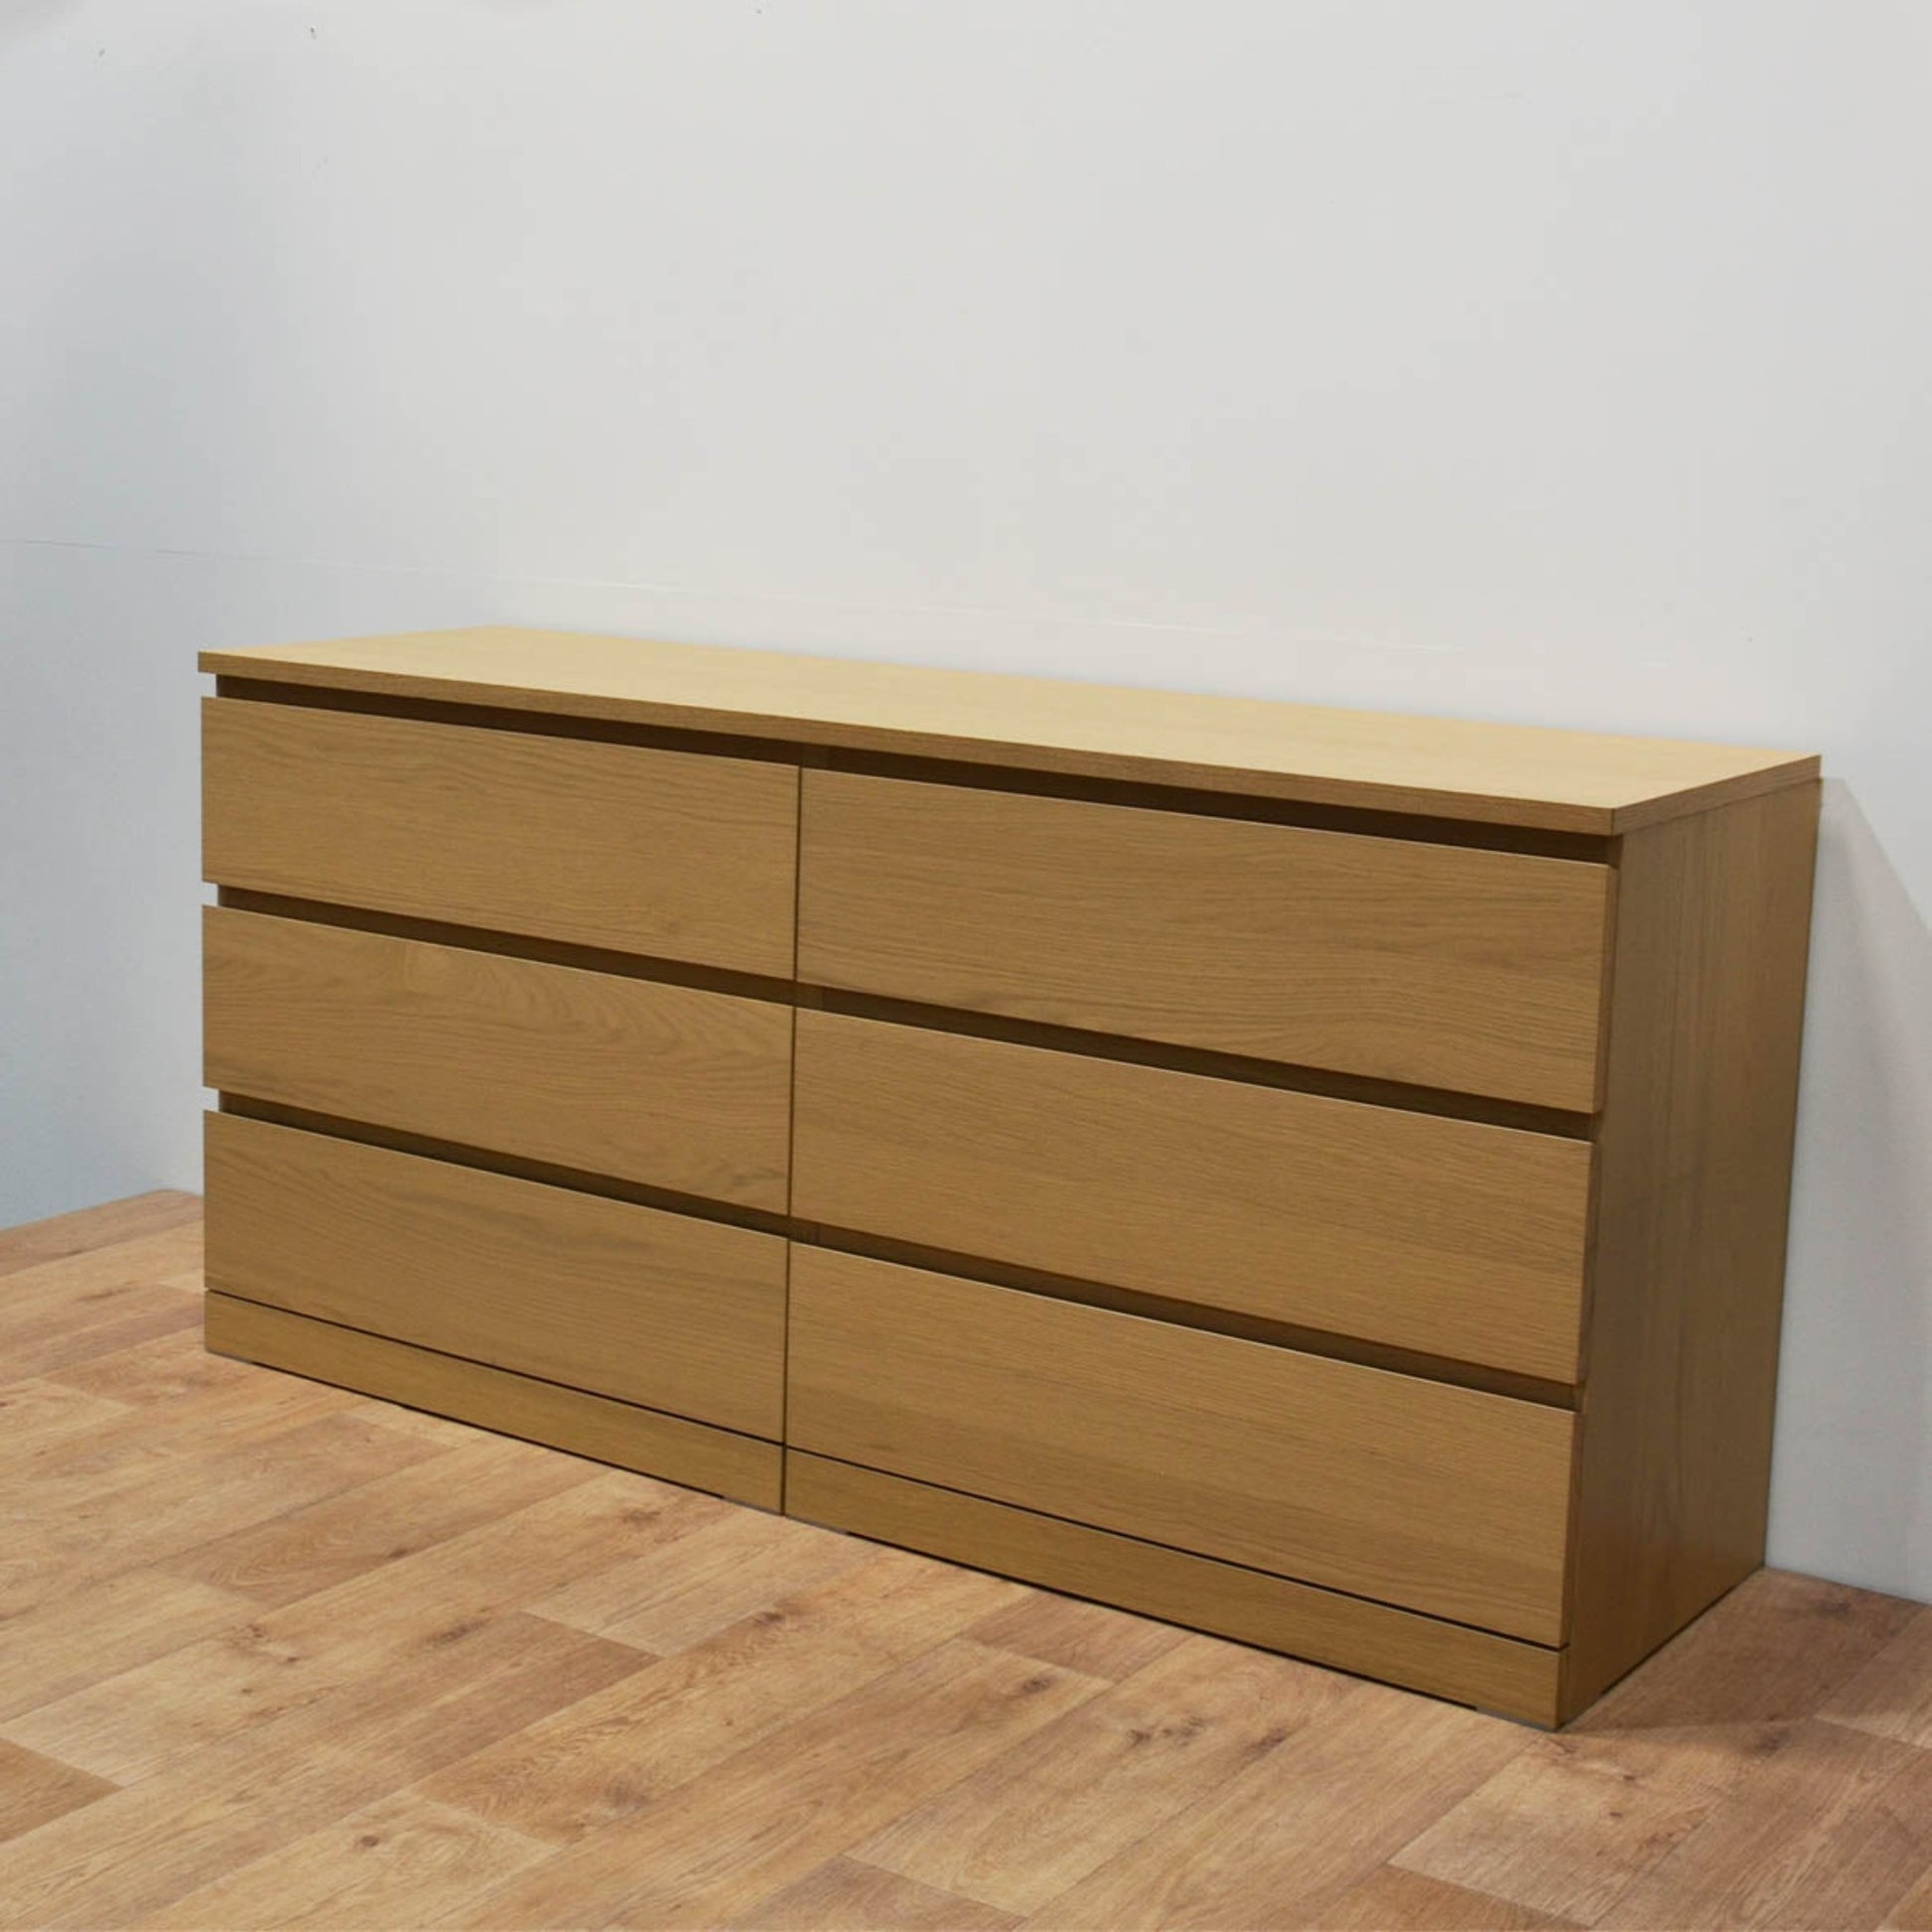 IKEA Malm 6-drawer Lowboy Chest, 160x48x78cm, White-stained Oak (4389213995073)